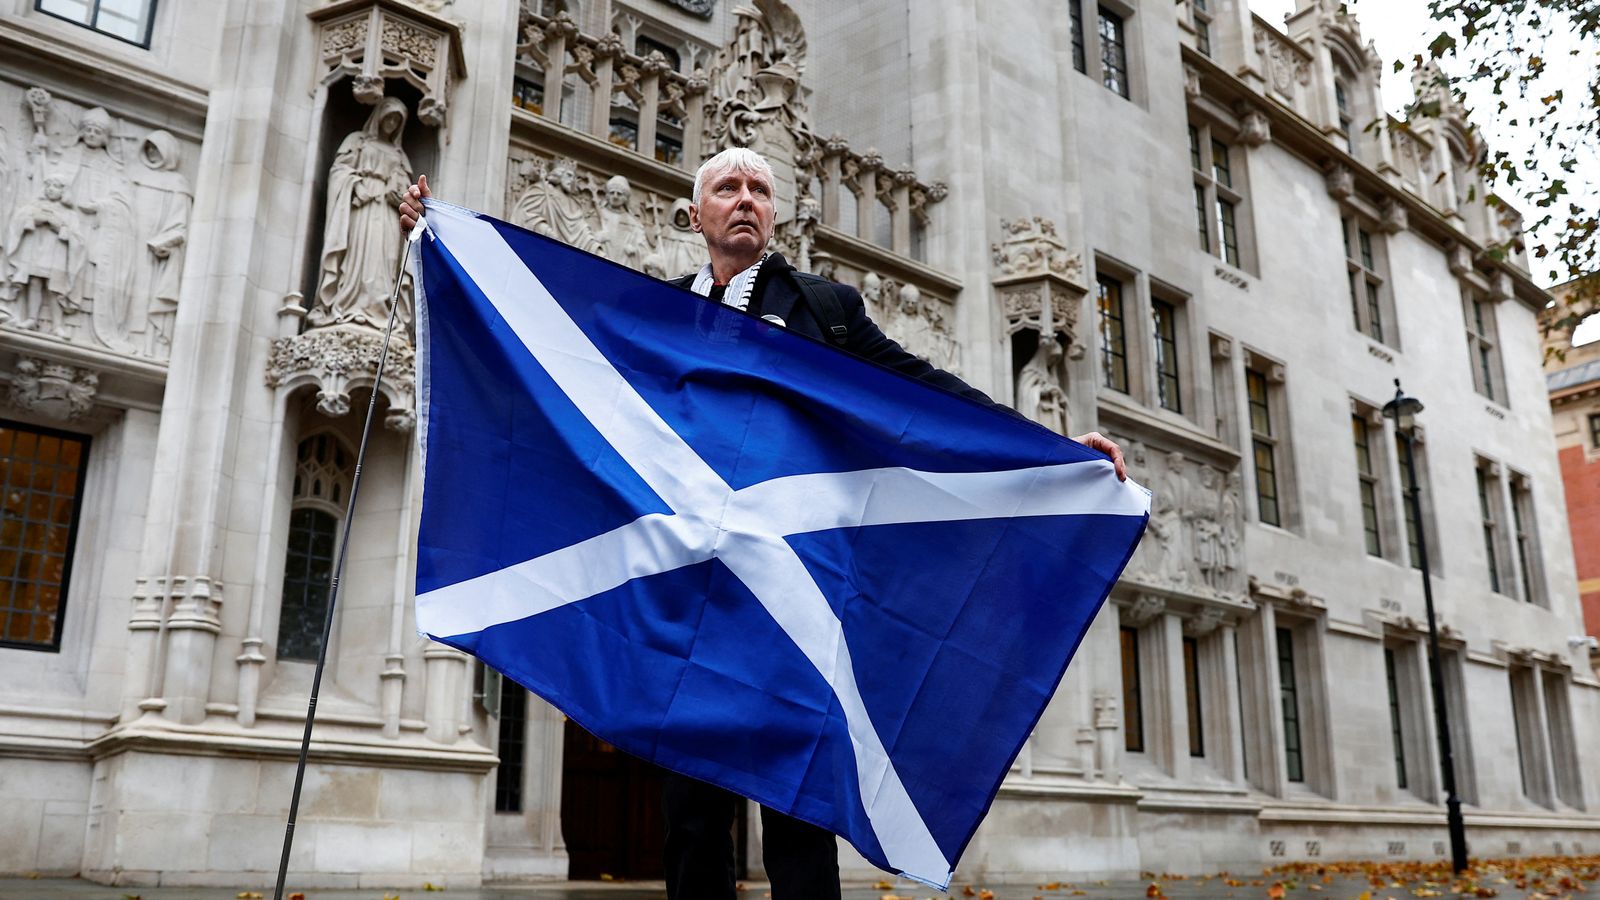 Indyref2 cannot go ahead without UK parliament permission, court rules